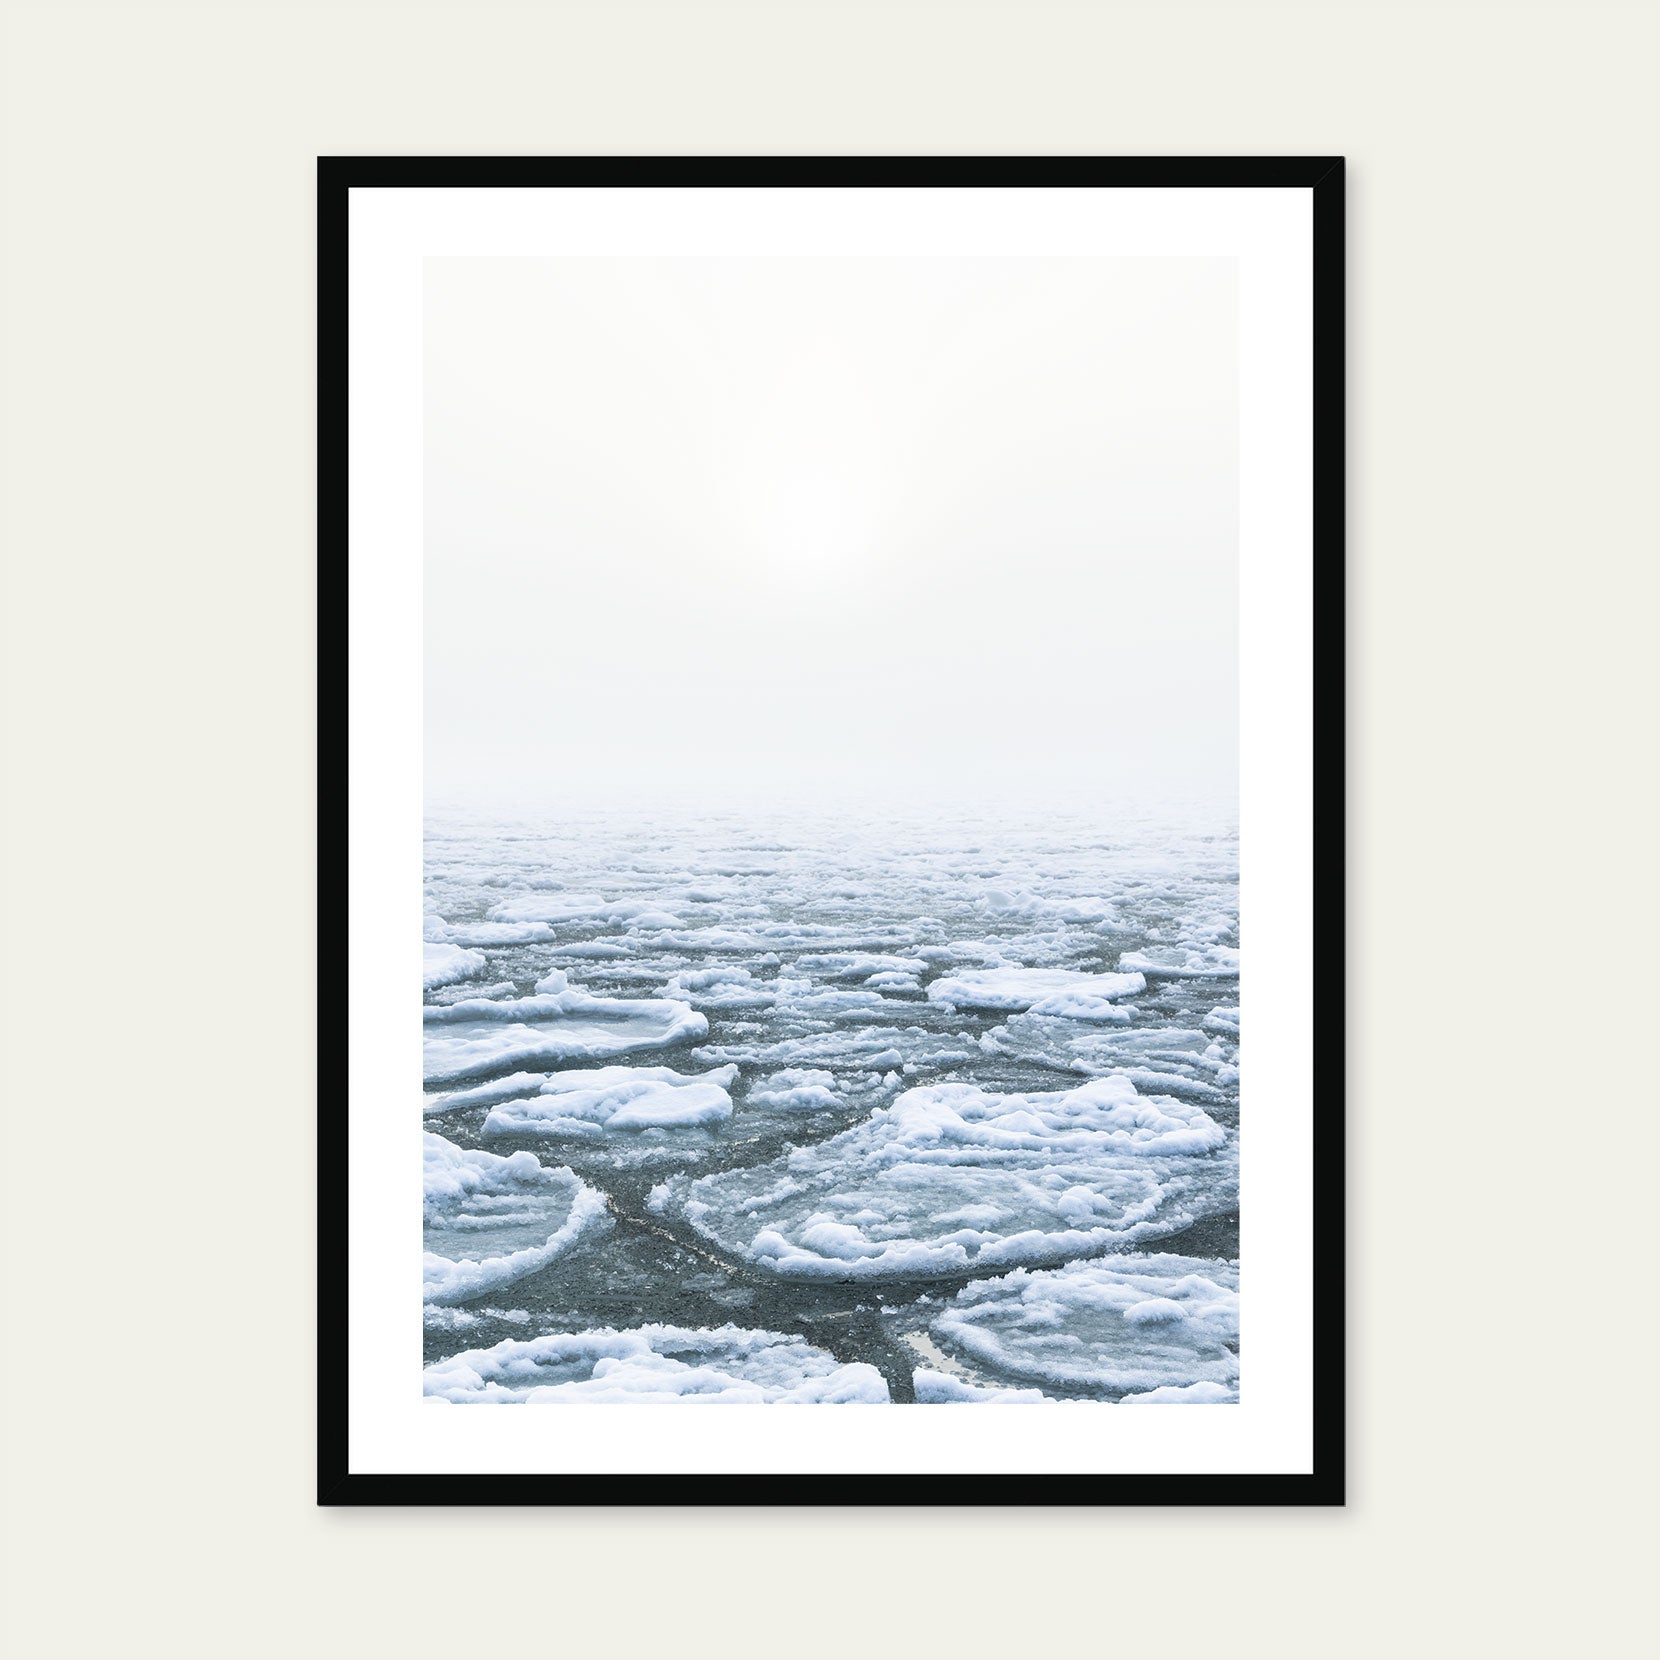 A black framed print of ice pans on foggy winter day